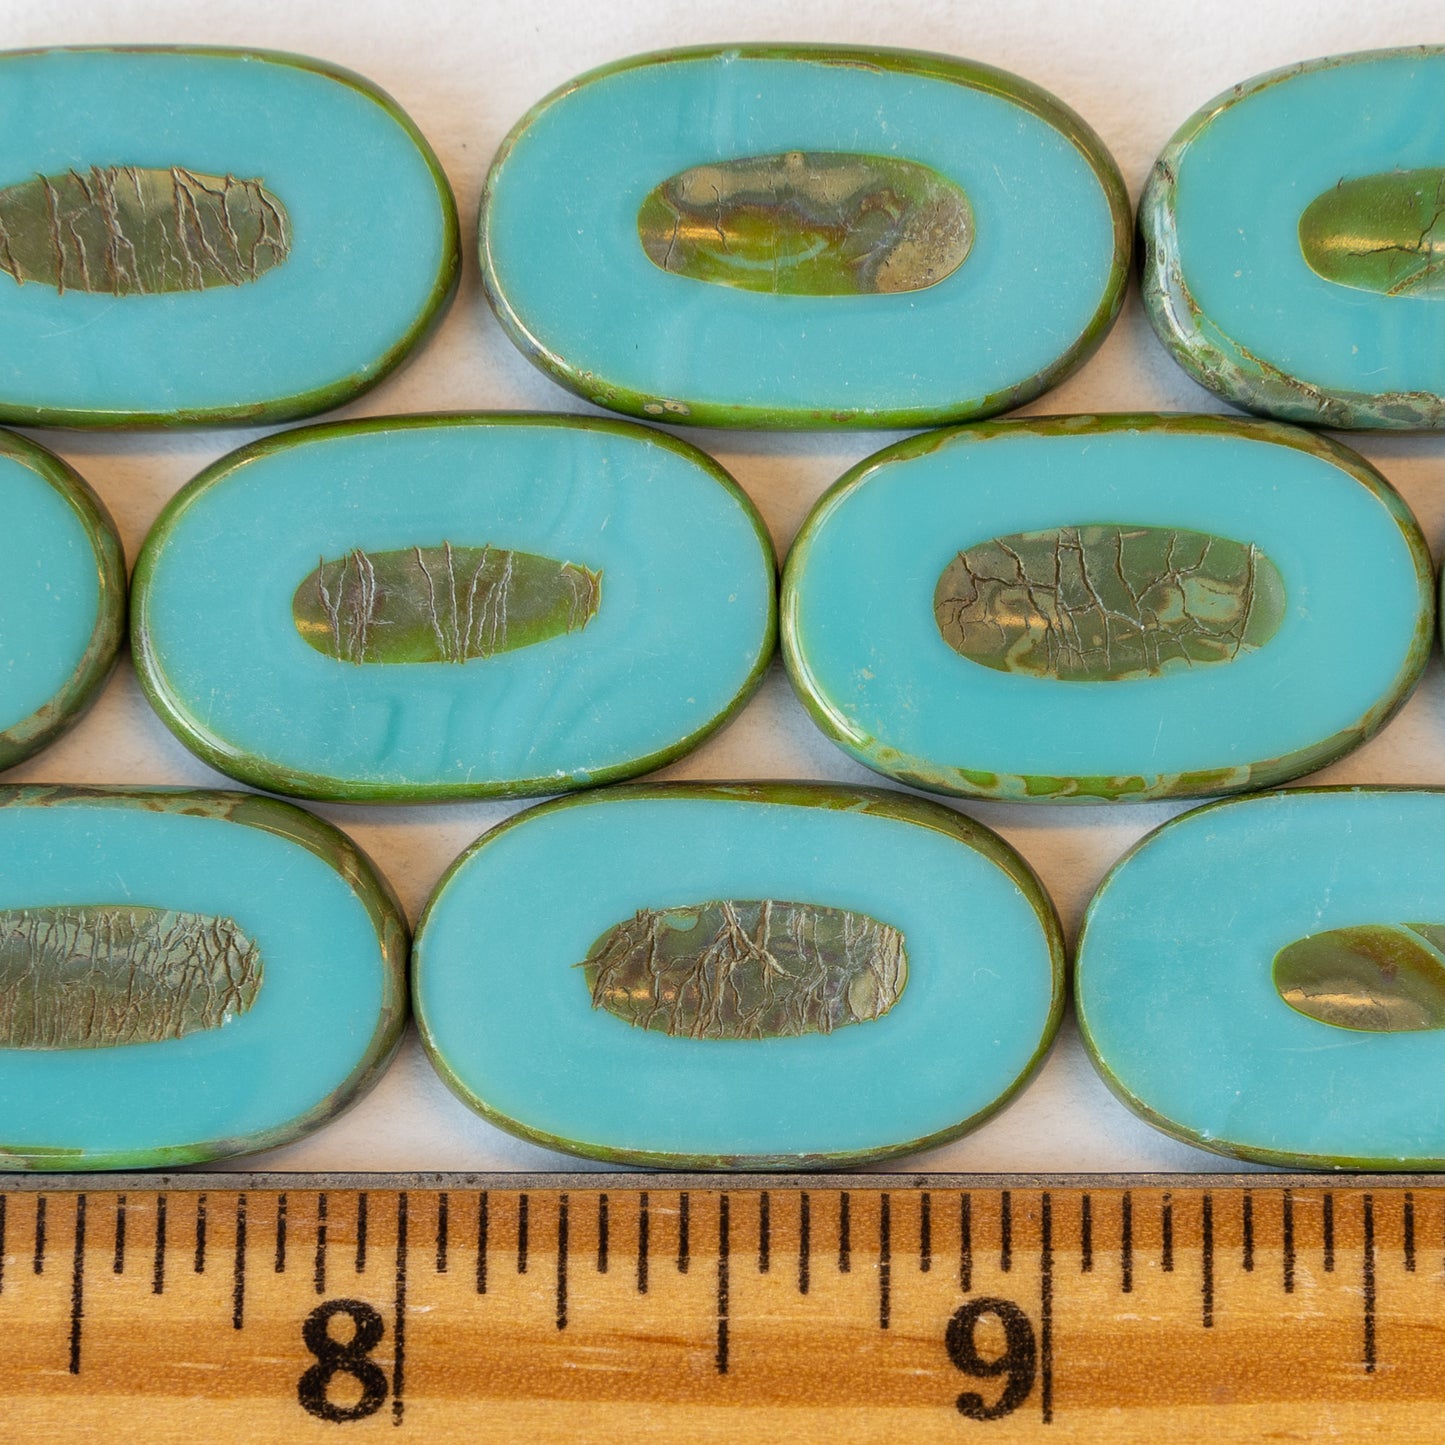 26x15mm Large Oval Picasso Beads - Turquoise Picasso - 2 or 10 beads